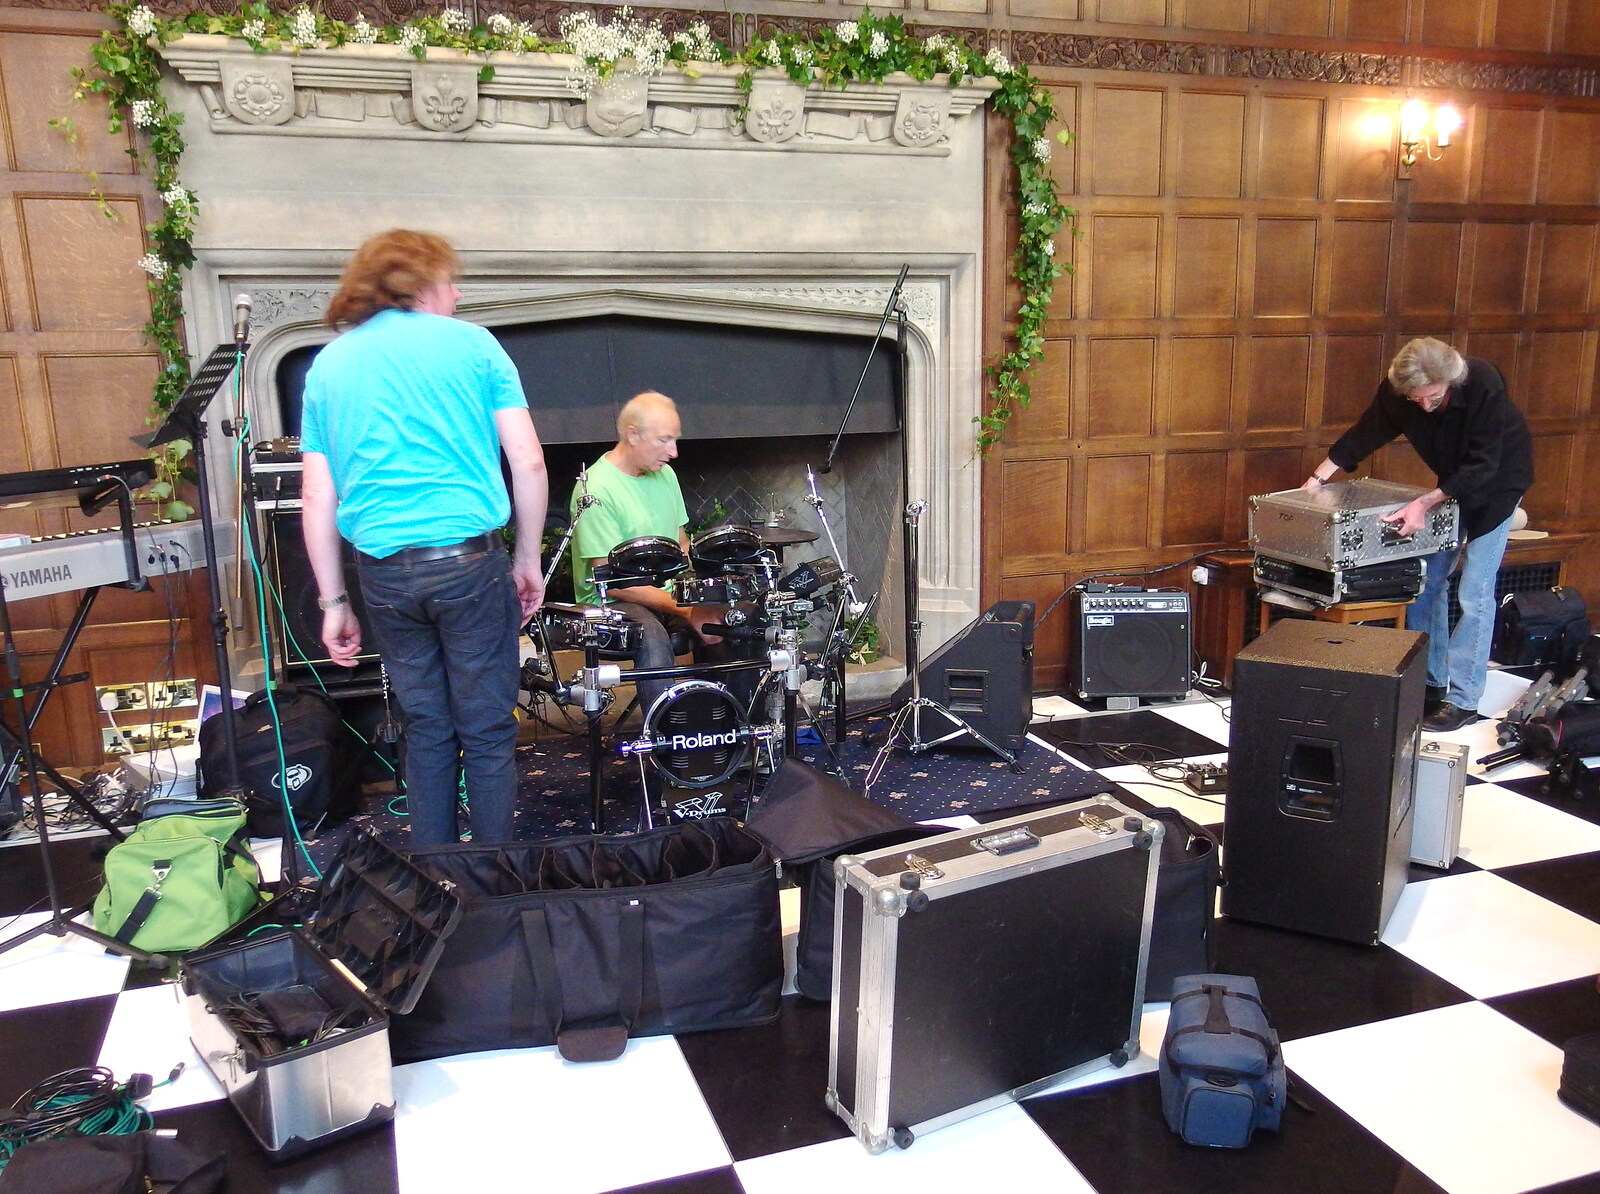 The BBs set up in front of the fireplace from The BBs at Hengrave Hall, Hengrave, Suffolk - 18th August 2013